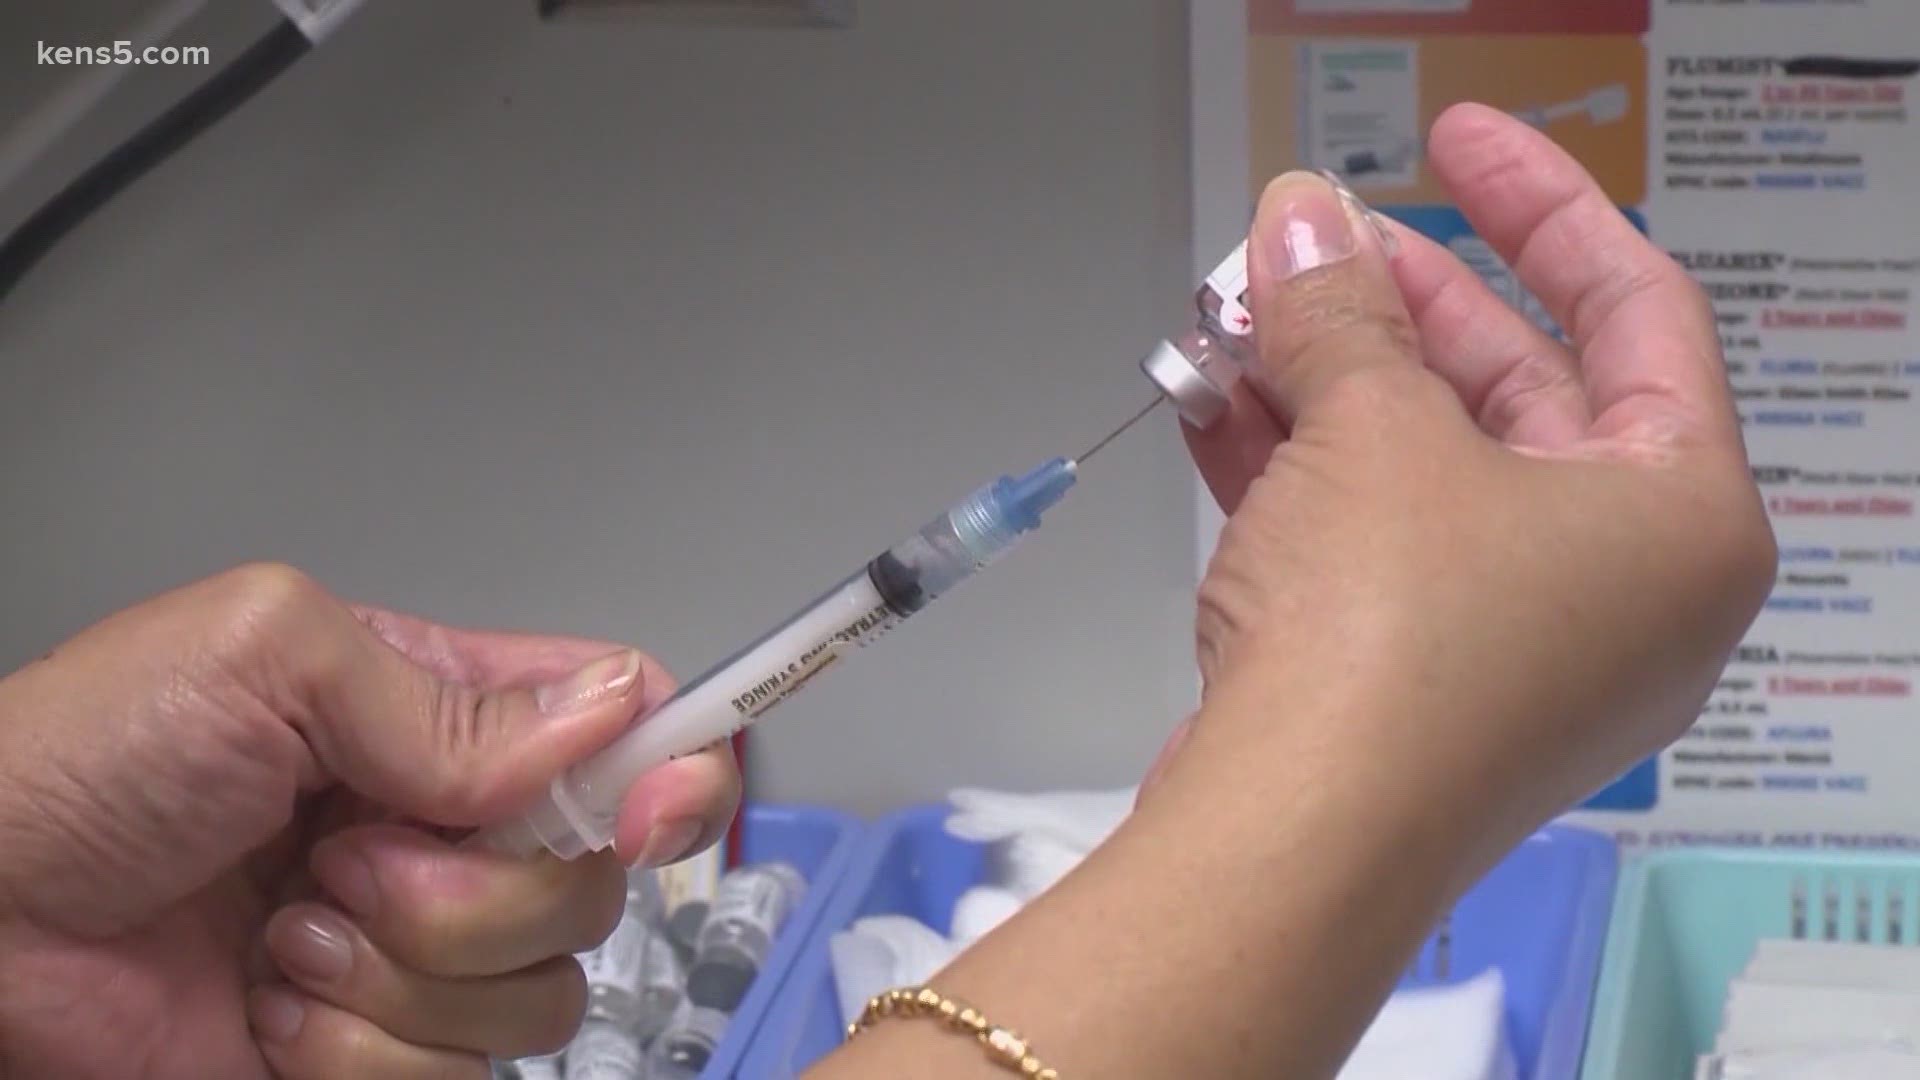 Local health officials say it's important for people to stay up to date with their vaccinations to prevent a surge in vaccine-preventable diseases.